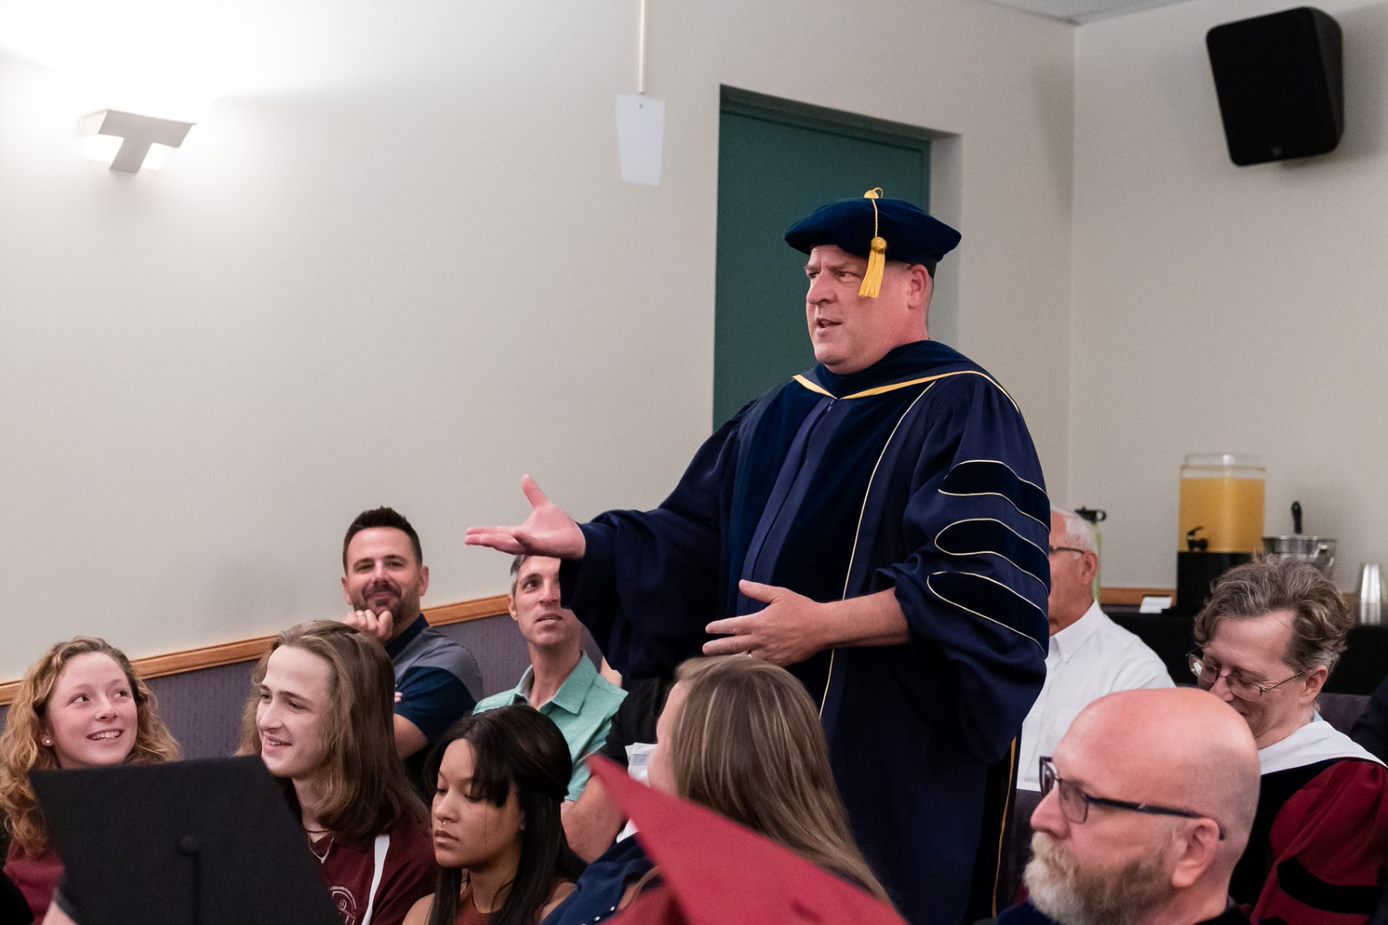 Dr. Johnson wearing ceremonial robes, standing and presenting to a crowd of people who are seated around him 